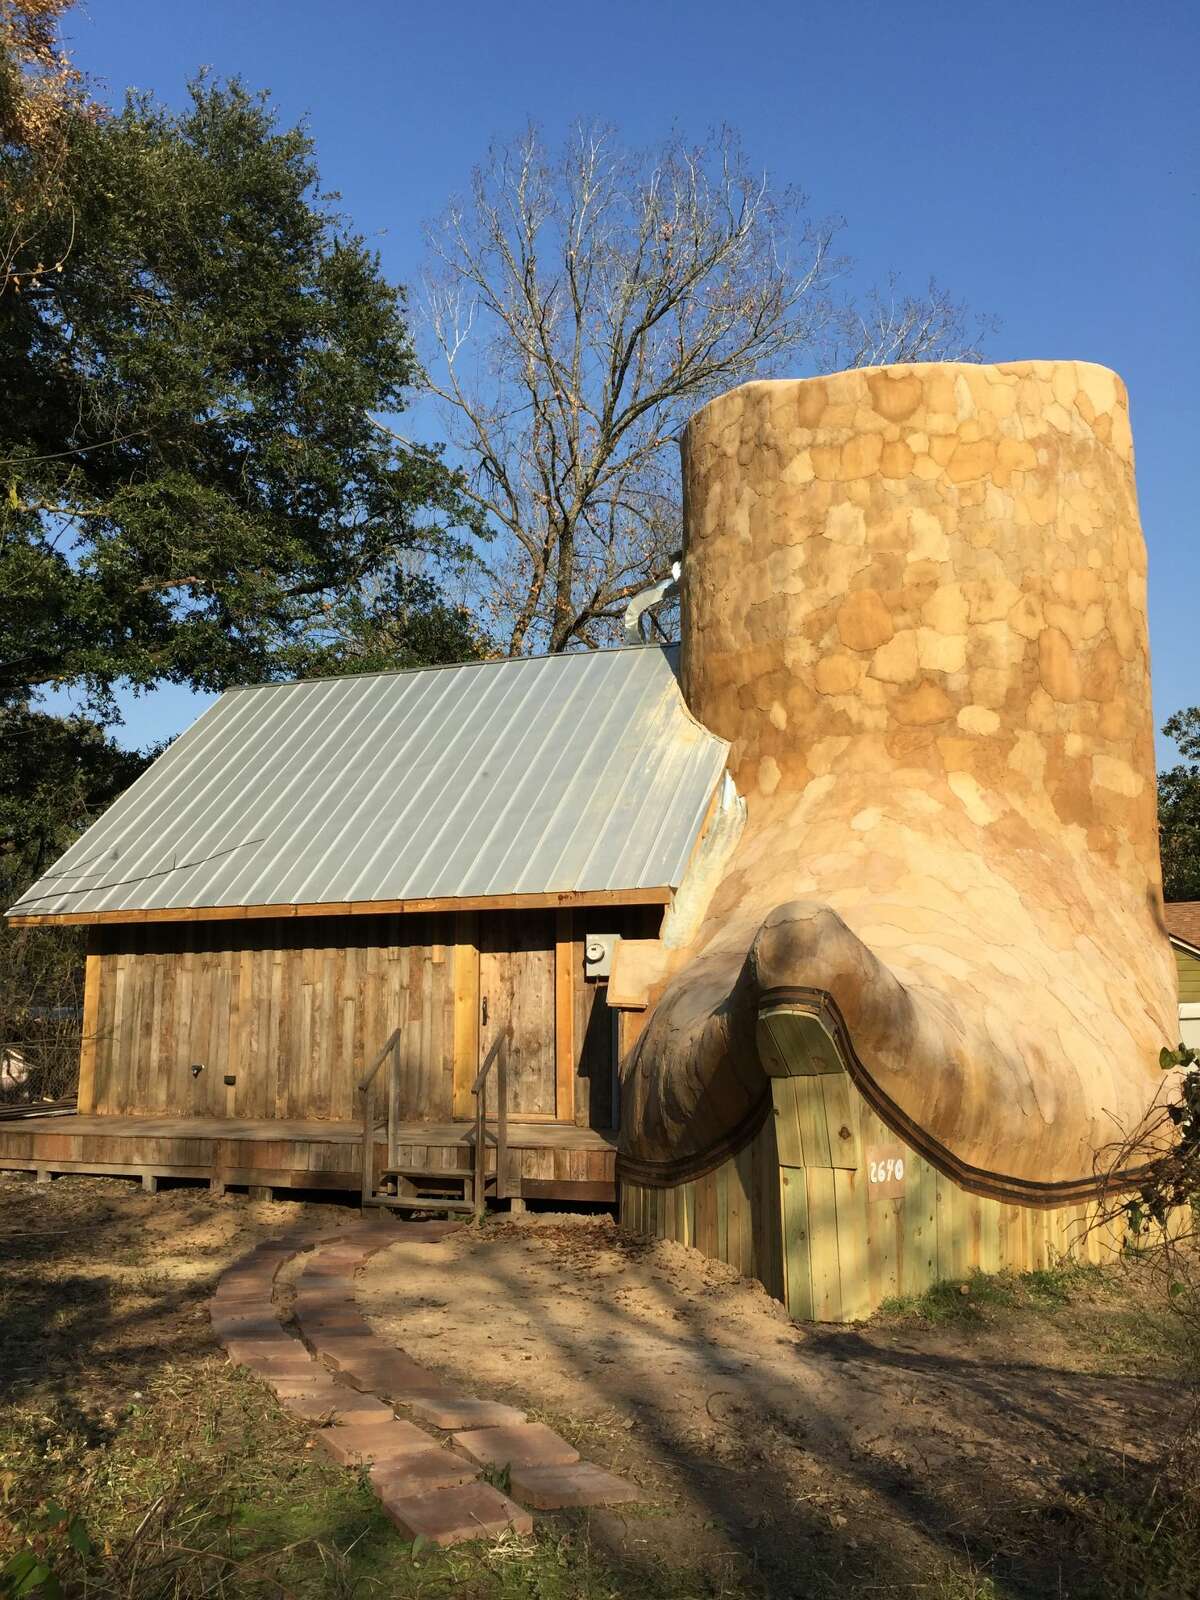 PHOTOS: A home shaped like a cowboy boot comes together in Huntsville You've heard the classic fairy tale about the old woman who lived in a shoe. Soon a lucky Texan can live in a cowboy boot home that renowned reclaimed materials artist Dan Phillips is constructing in Huntsville. Click through to see more photos of the cowboy-friendly home... 